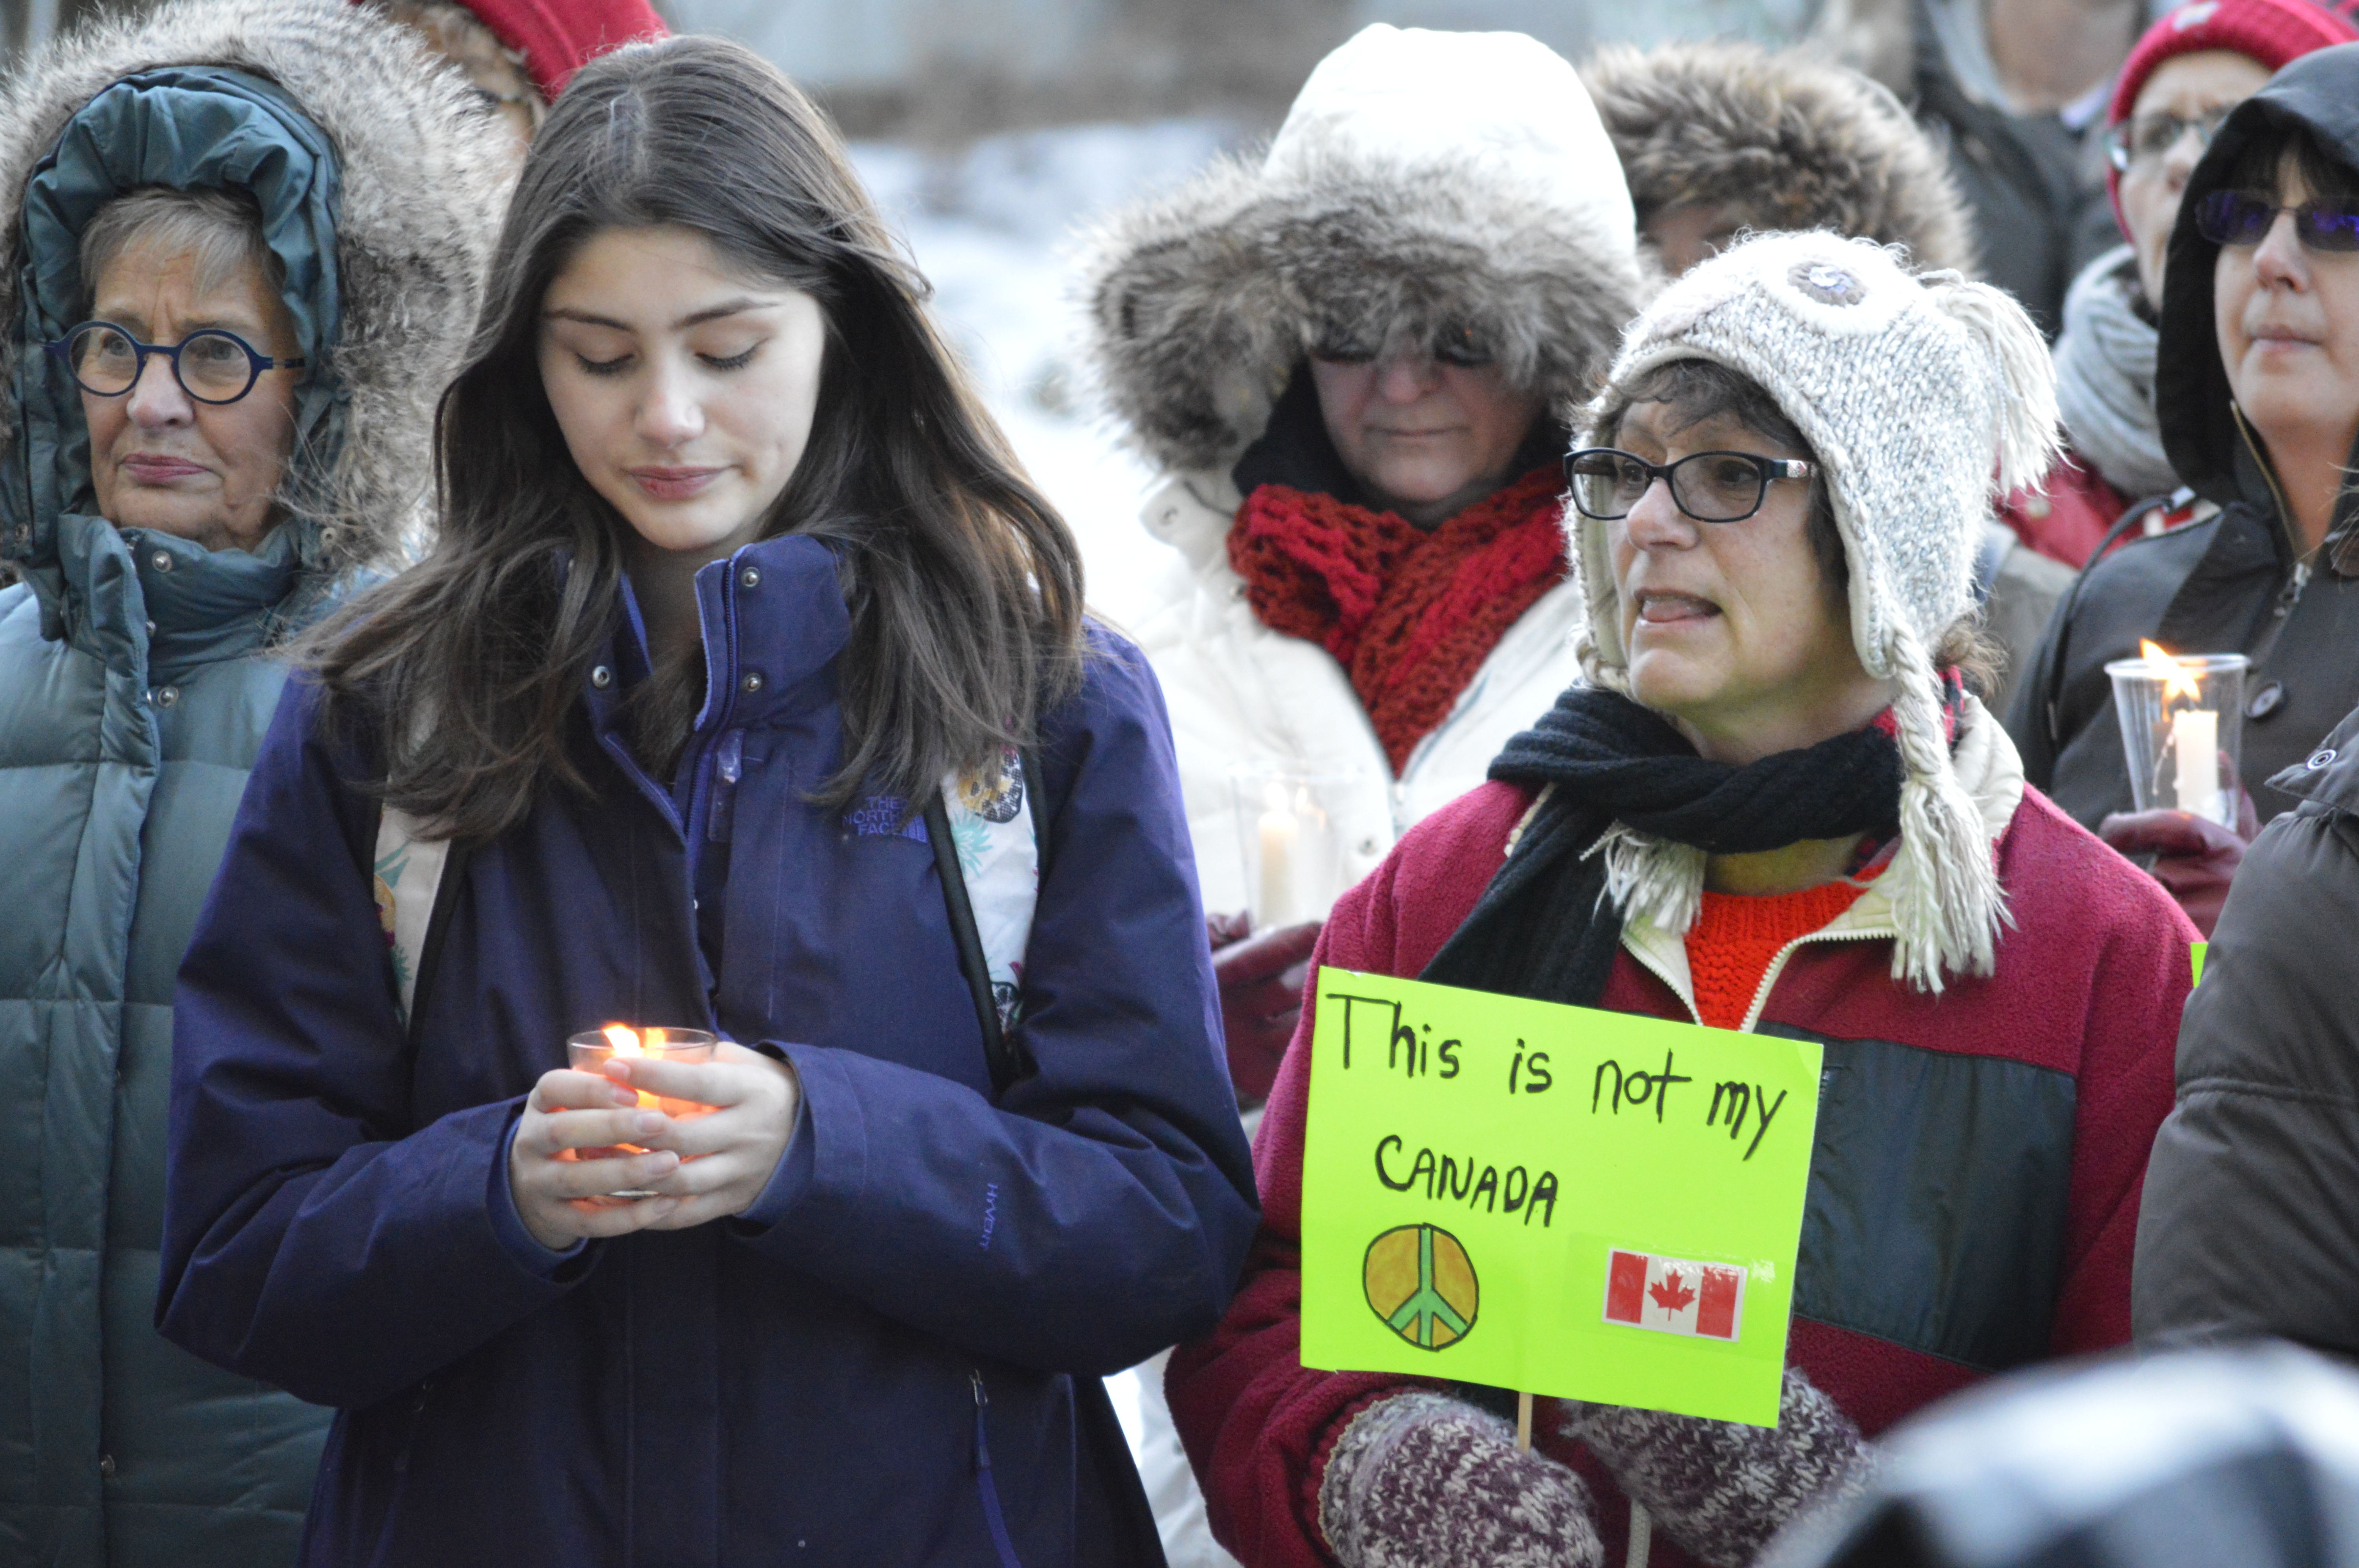 SHOWING SUPPORT - About 100 of people gathered at City Hall Park on Wednesday evening for a candlelight vigil in honour of the victims of the mosque shooting in Sainte-Foy